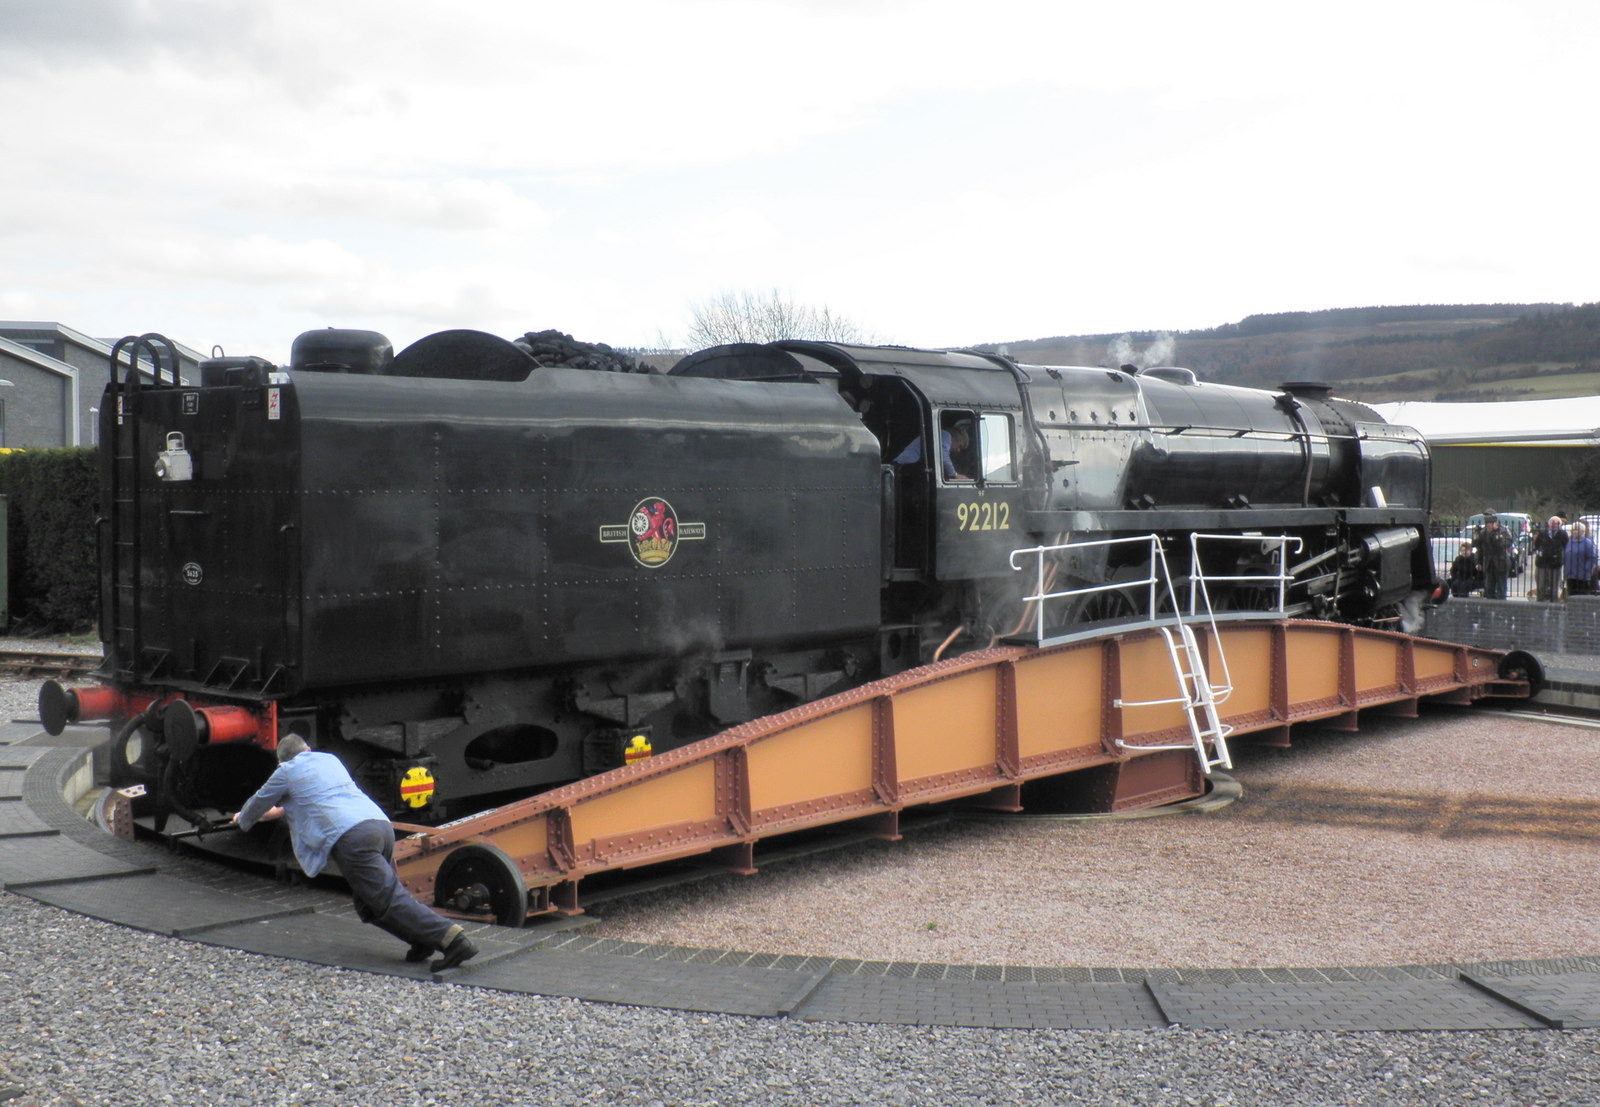 File:The railway turntable at Minehead - geograph.org.uk 